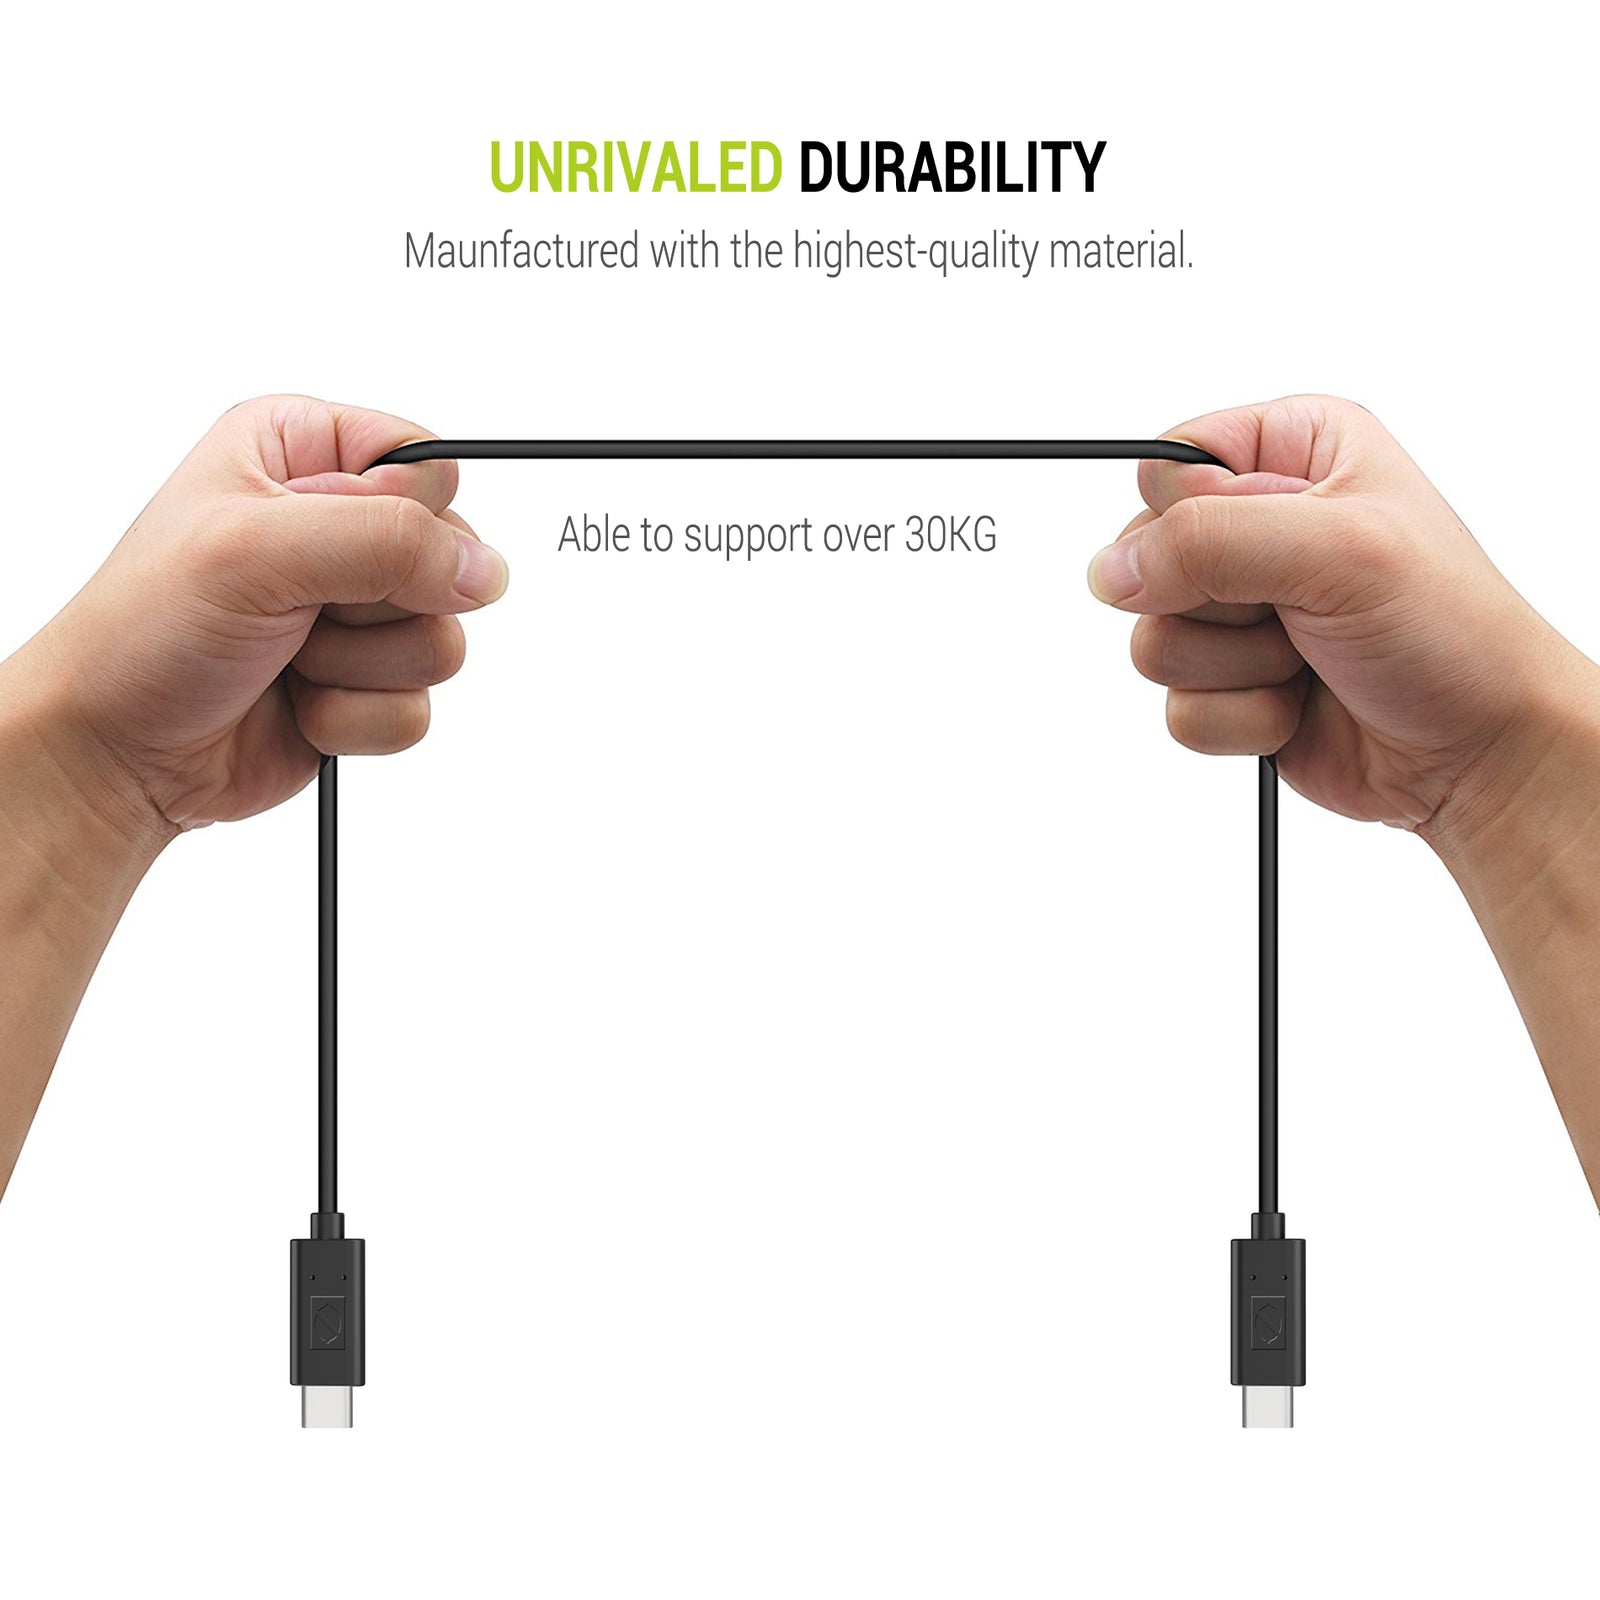 USB-C to USB-C Cable for USB Type C Devices (USB 2.0,3.3ft/1m)